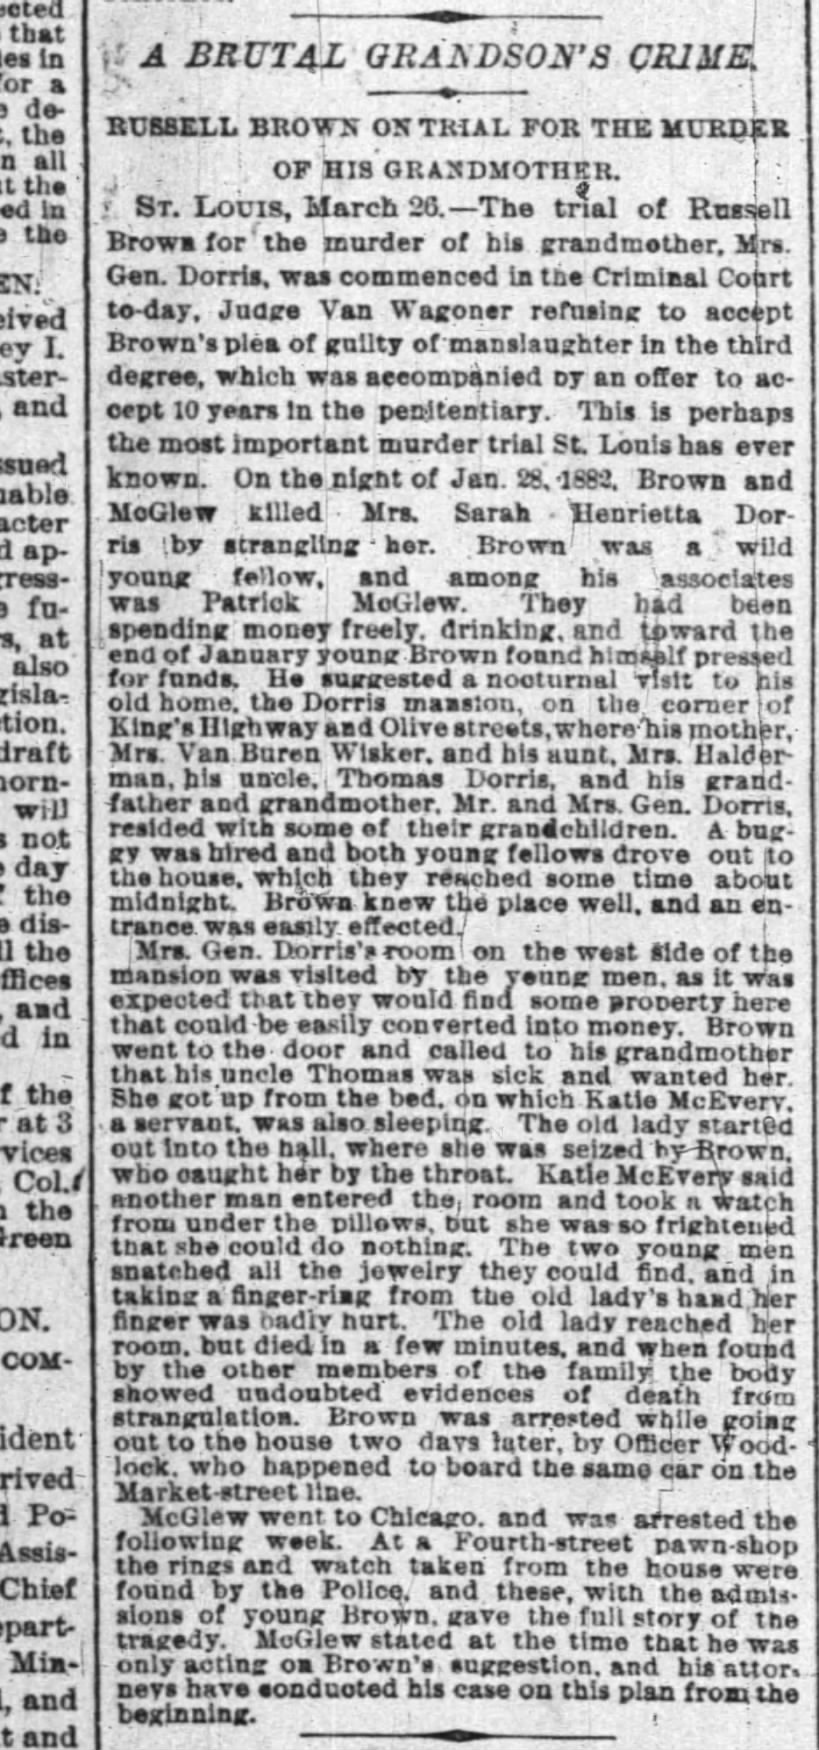 Bad, Bad Russell Brown & his McGlew henchman, NYT 27 Mar 1883